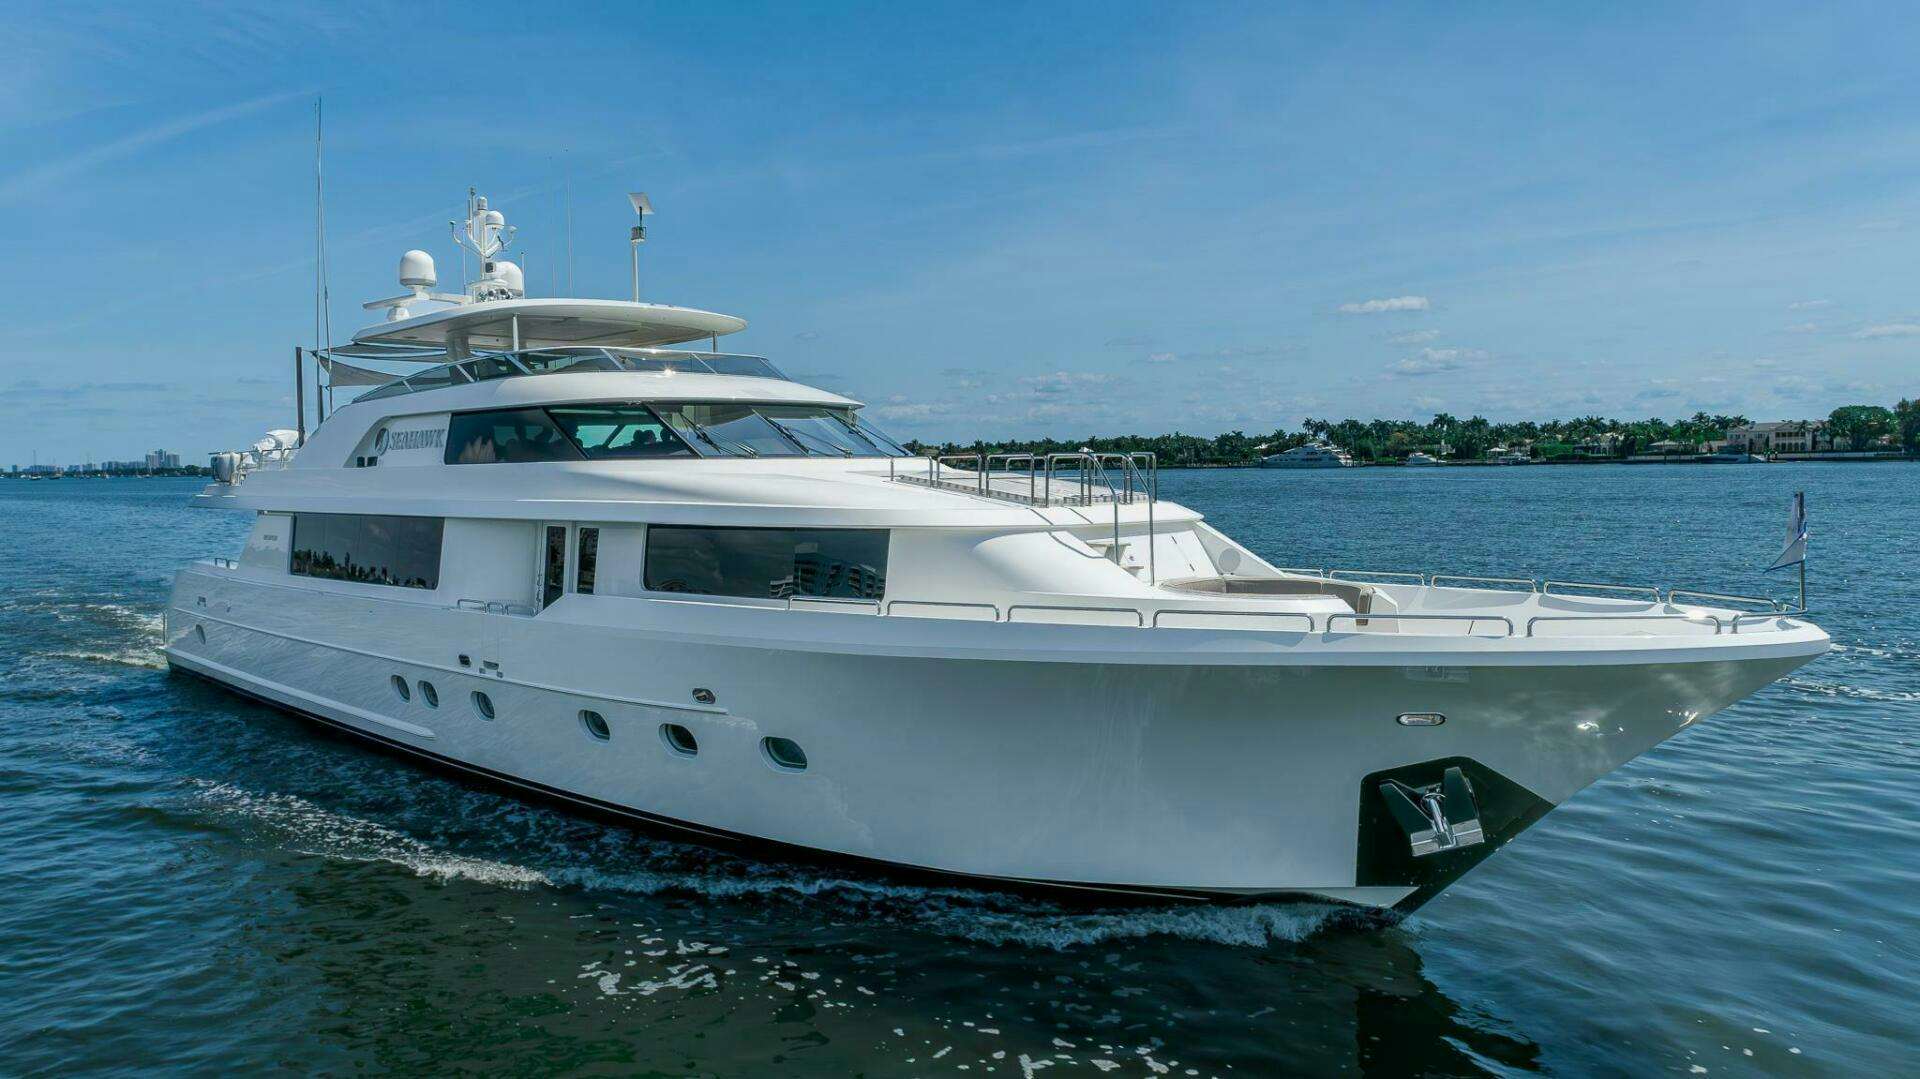 SEAHAWK Yacht for Sale in West Palm Beach